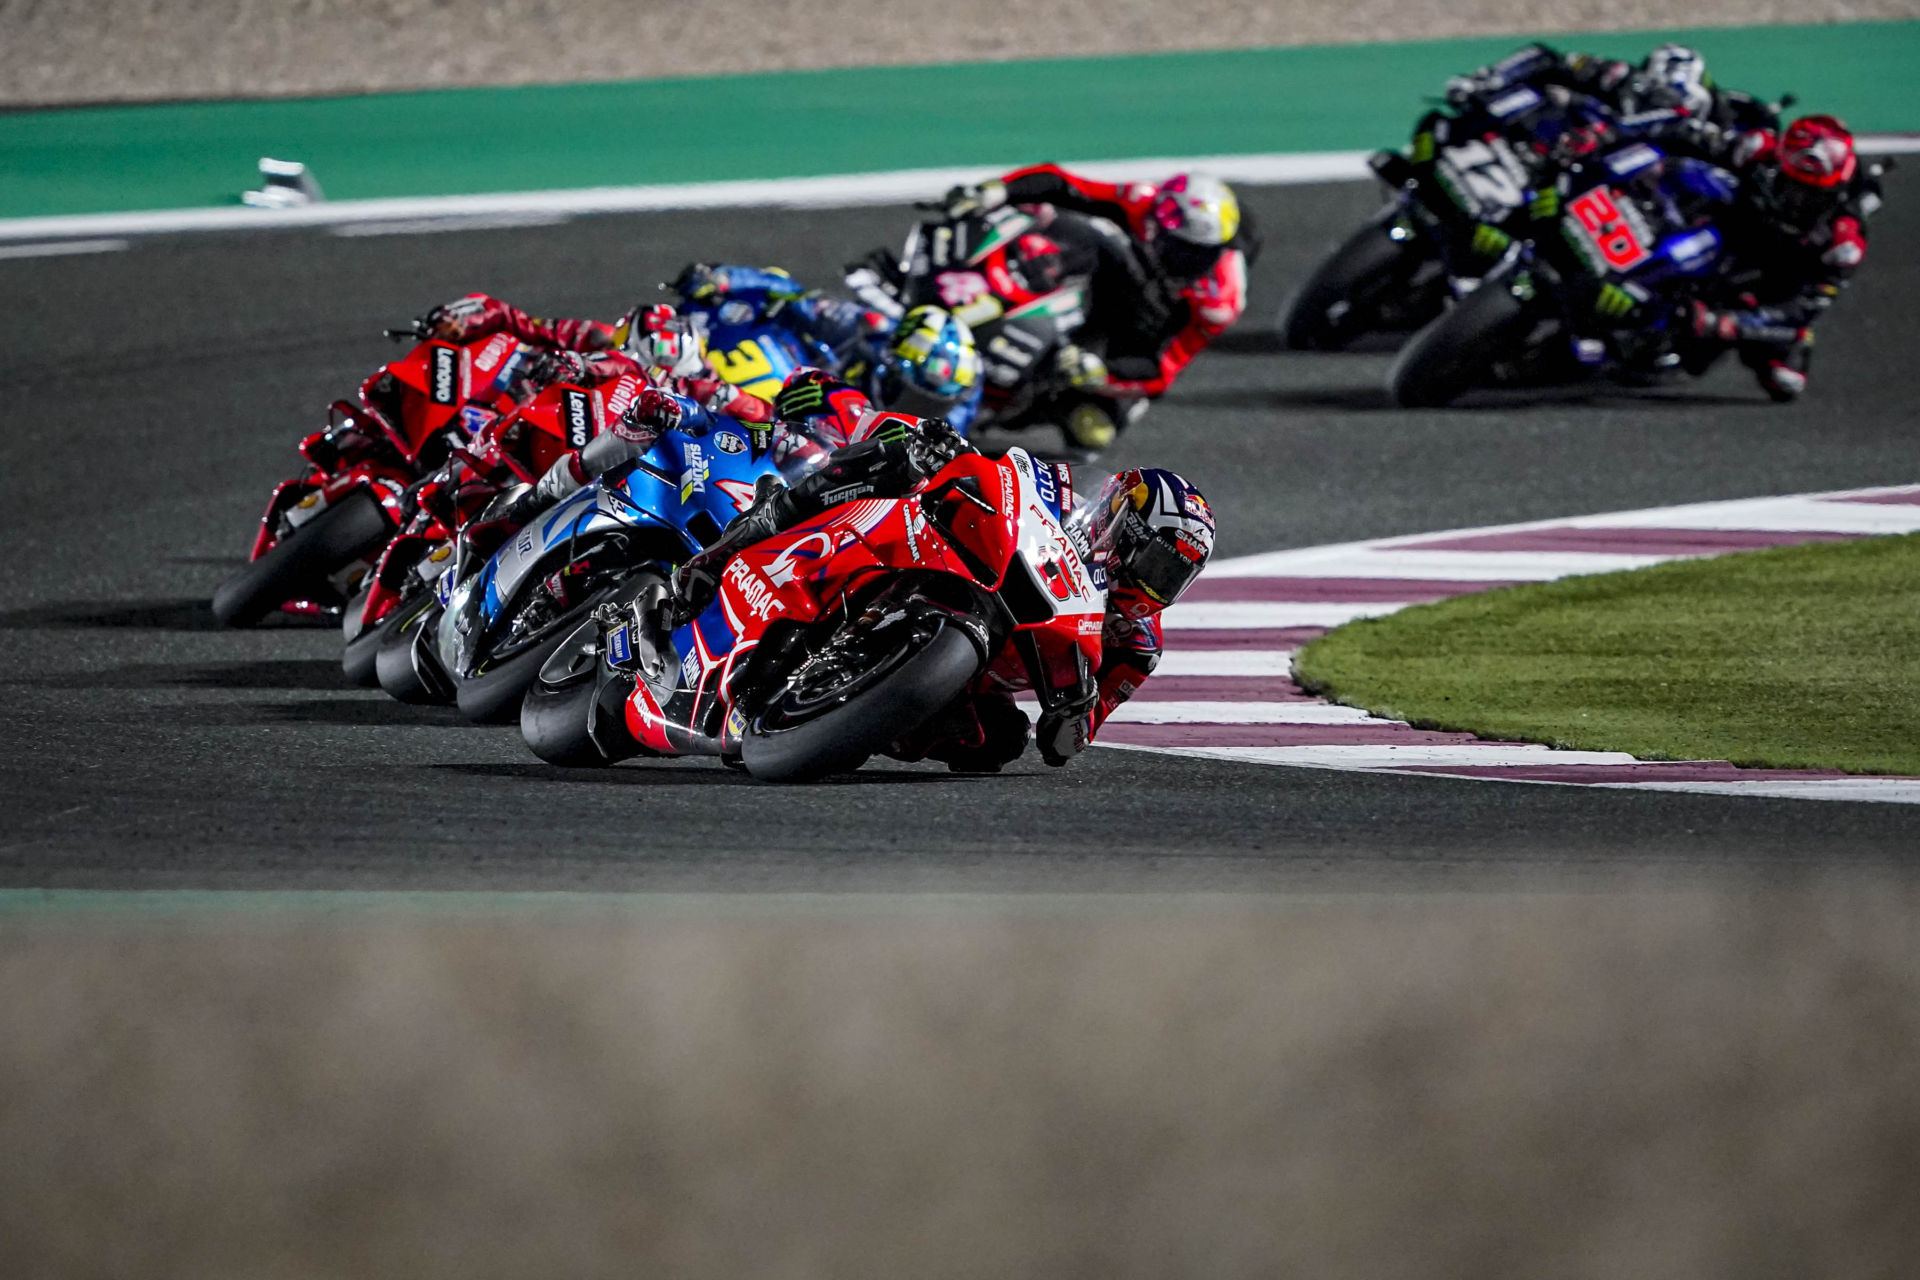 The first race of the 2022 MotoGP season is scheduled March 4-6 at Losail International Circuit, in Qatar. Here, Johann Zarco (5) leads a pack of riders during a MotoGP race earlier this season in Qatar. Photo courtesy Pramac Racing.